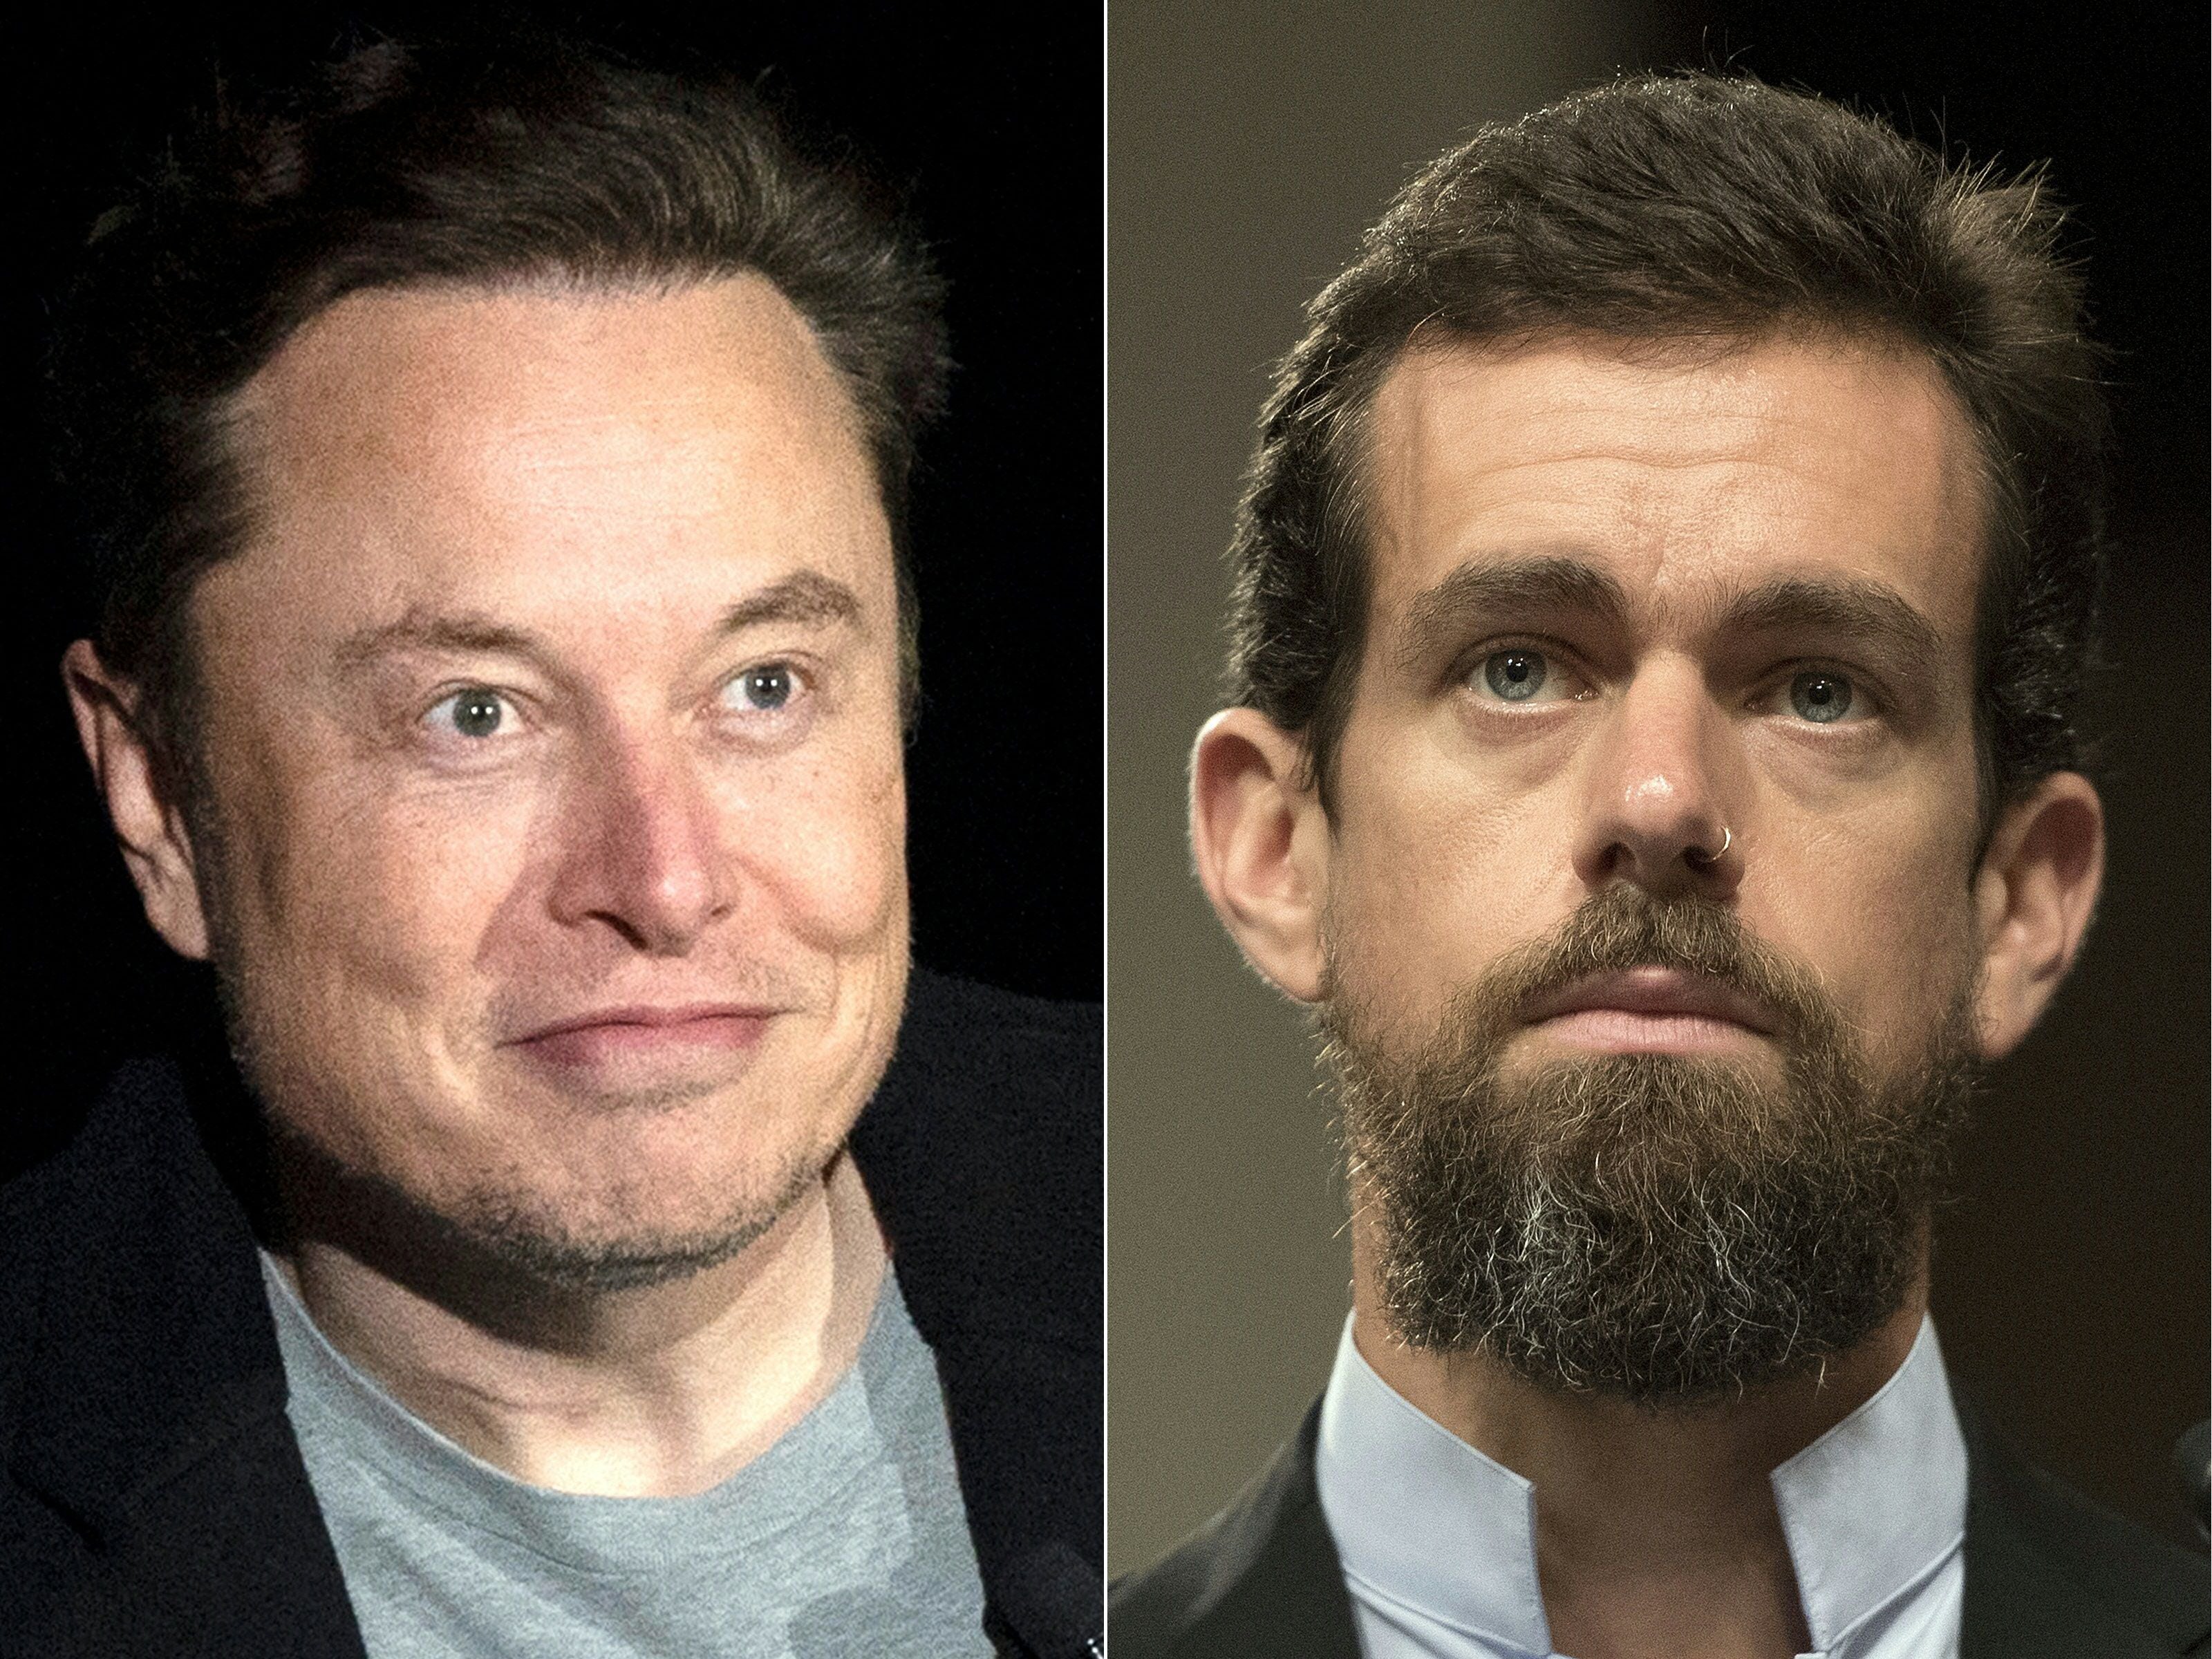 Elon Musk, left, and Jack Dorsey, right